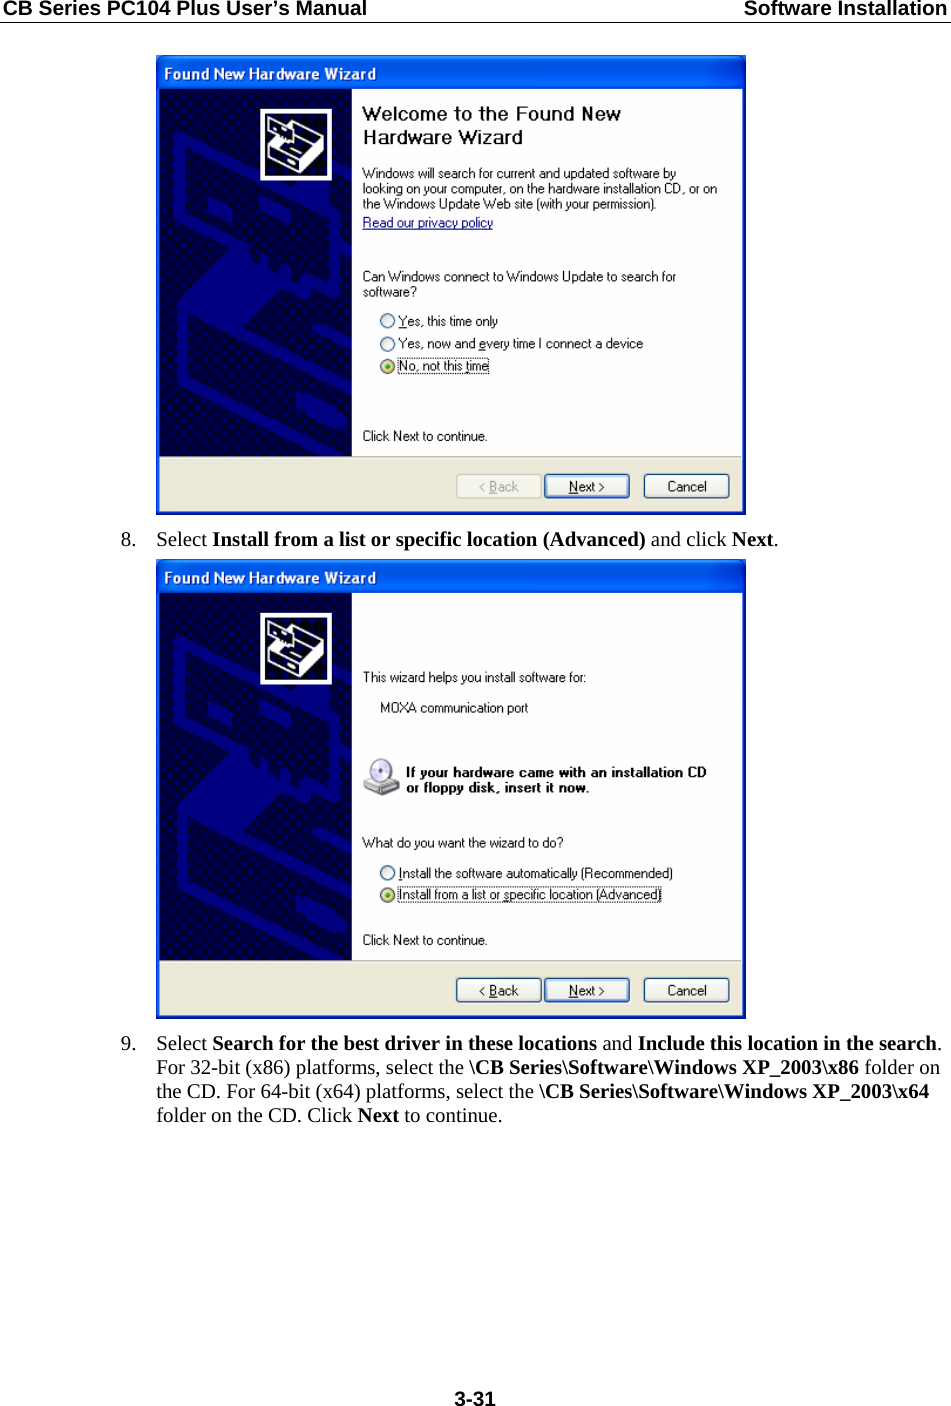 CB Series PC104 Plus User’s Manual  Software Installation  8. Select Install from a list or specific location (Advanced) and click Next.  9. Select Search for the best driver in these locations and Include this location in the search. For 32-bit (x86) platforms, select the \CB Series\Software\Windows XP_2003\x86 folder on the CD. For 64-bit (x64) platforms, select the \CB Series\Software\Windows XP_2003\x64 folder on the CD. Click Next to continue.  3-31